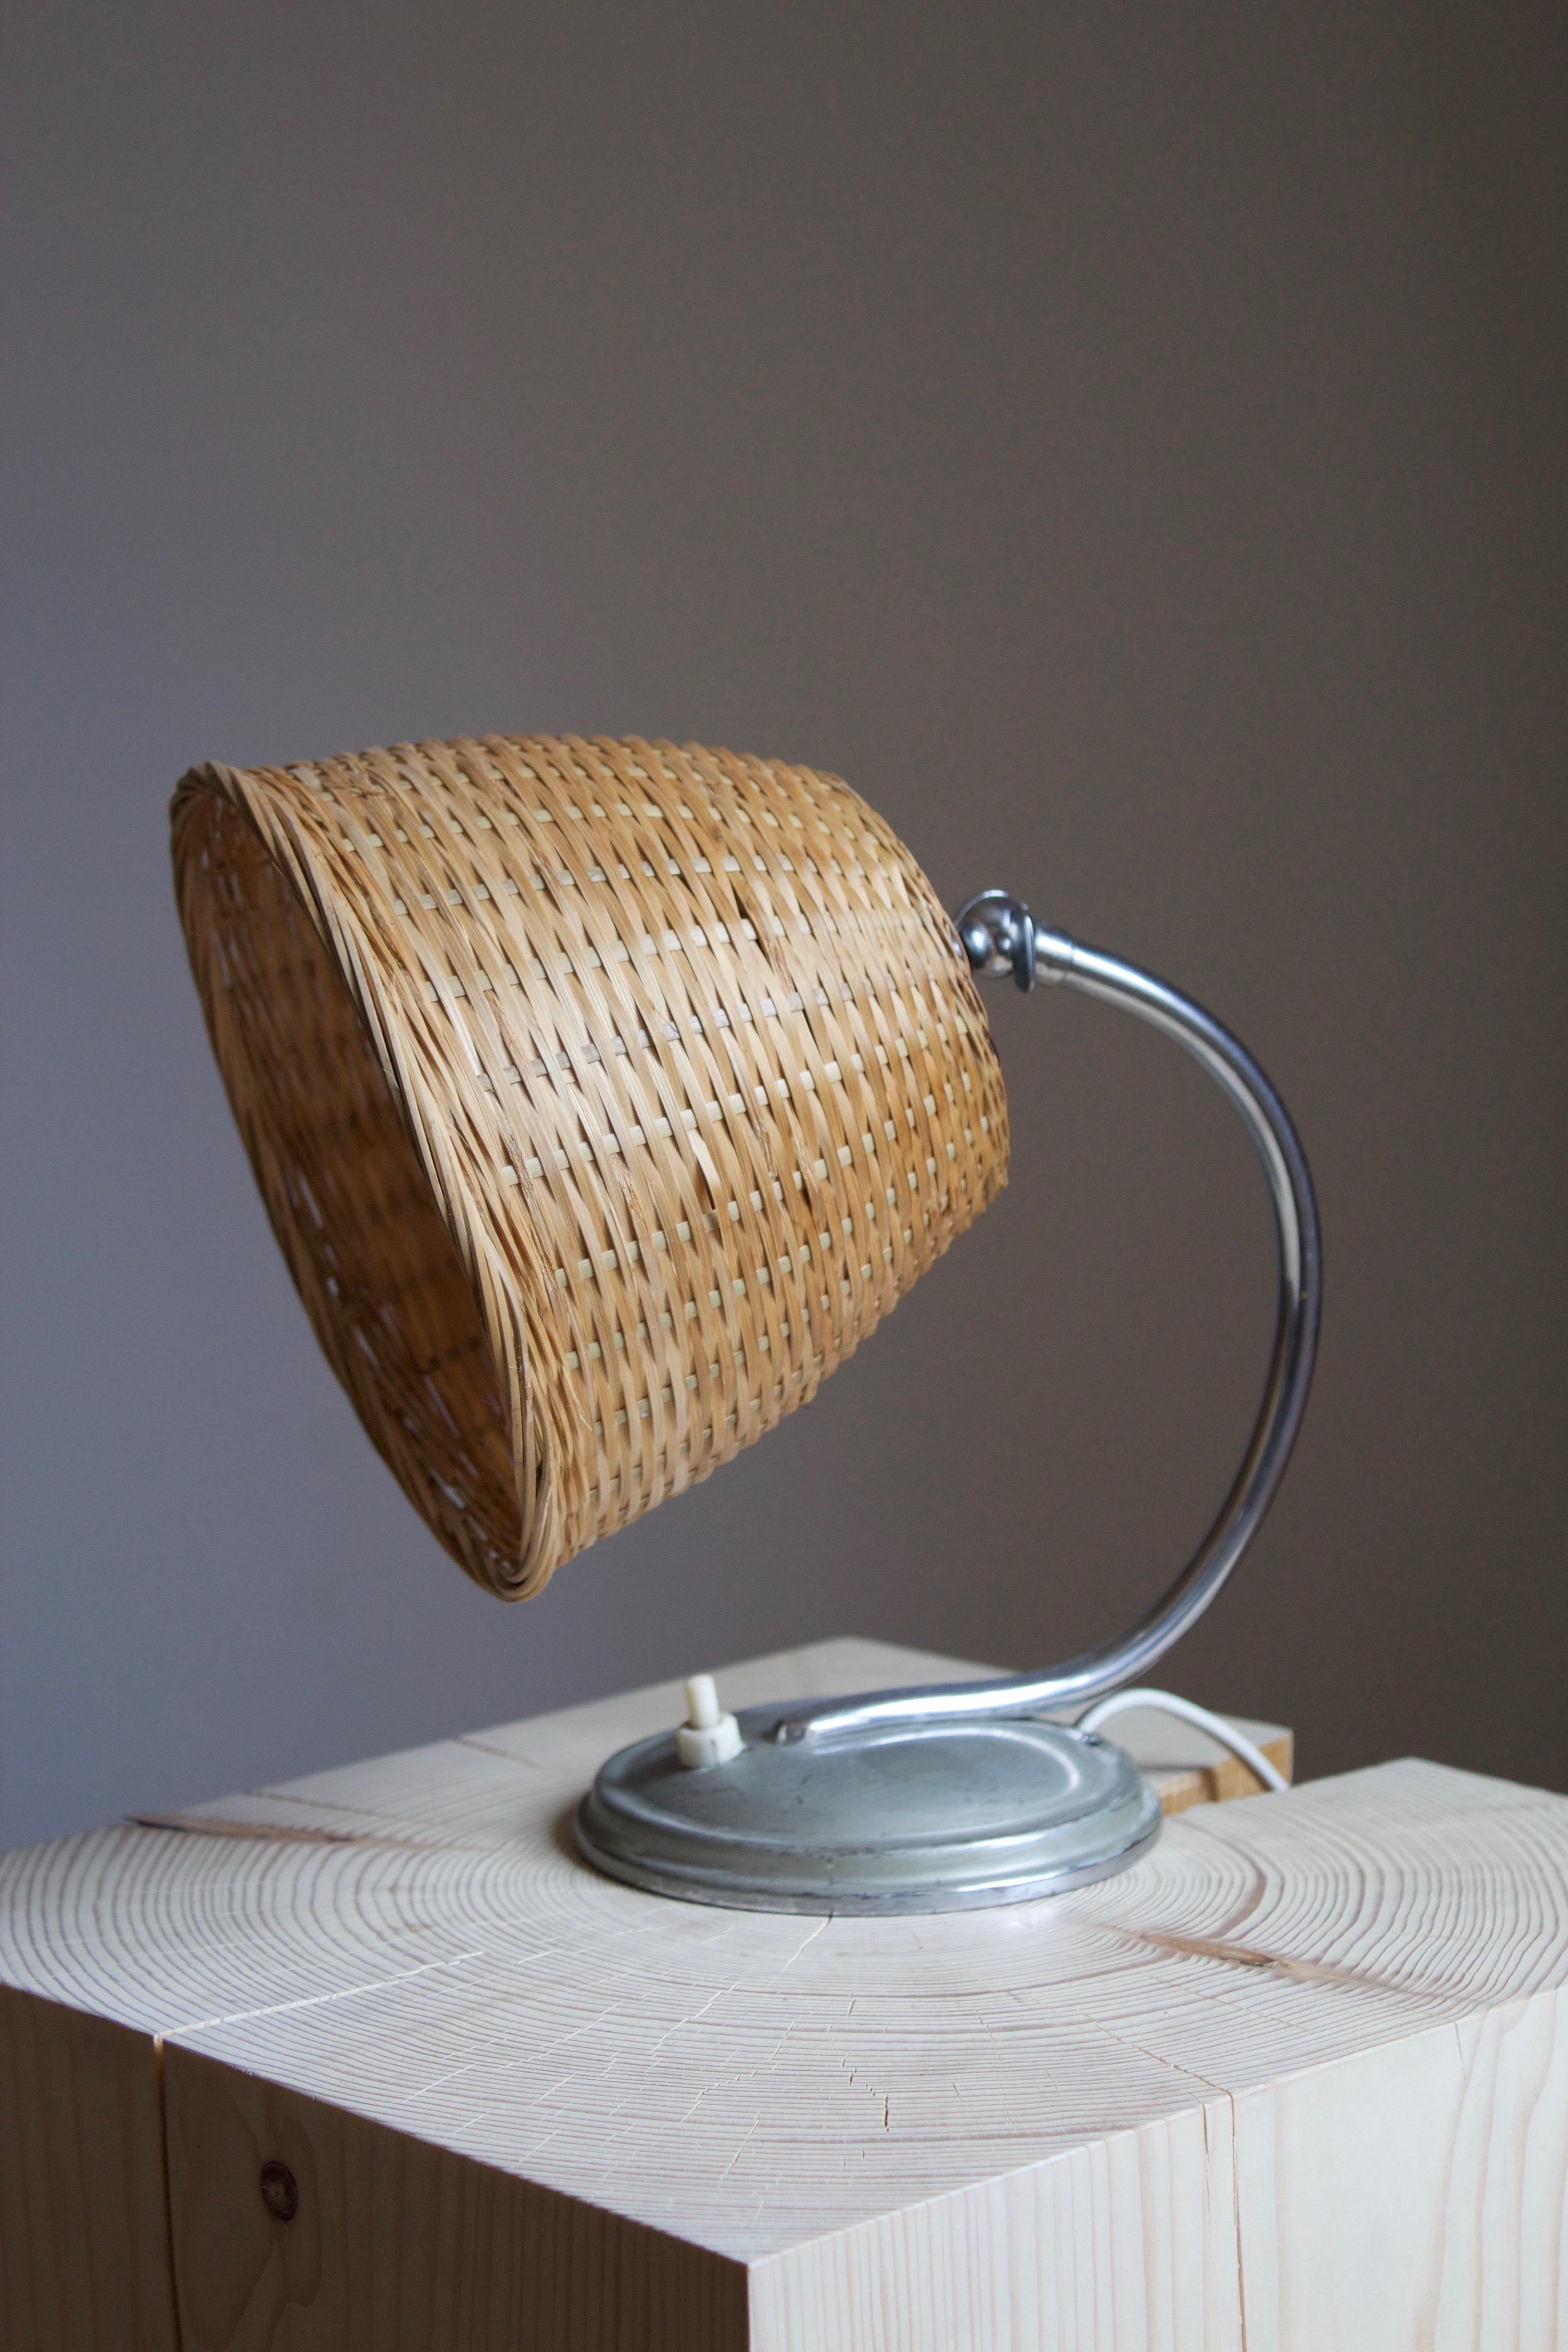 A small functionalist table lamp. Designed and produced in Sweden, c. 1940s. Assorted vintage rattan lampshade.

